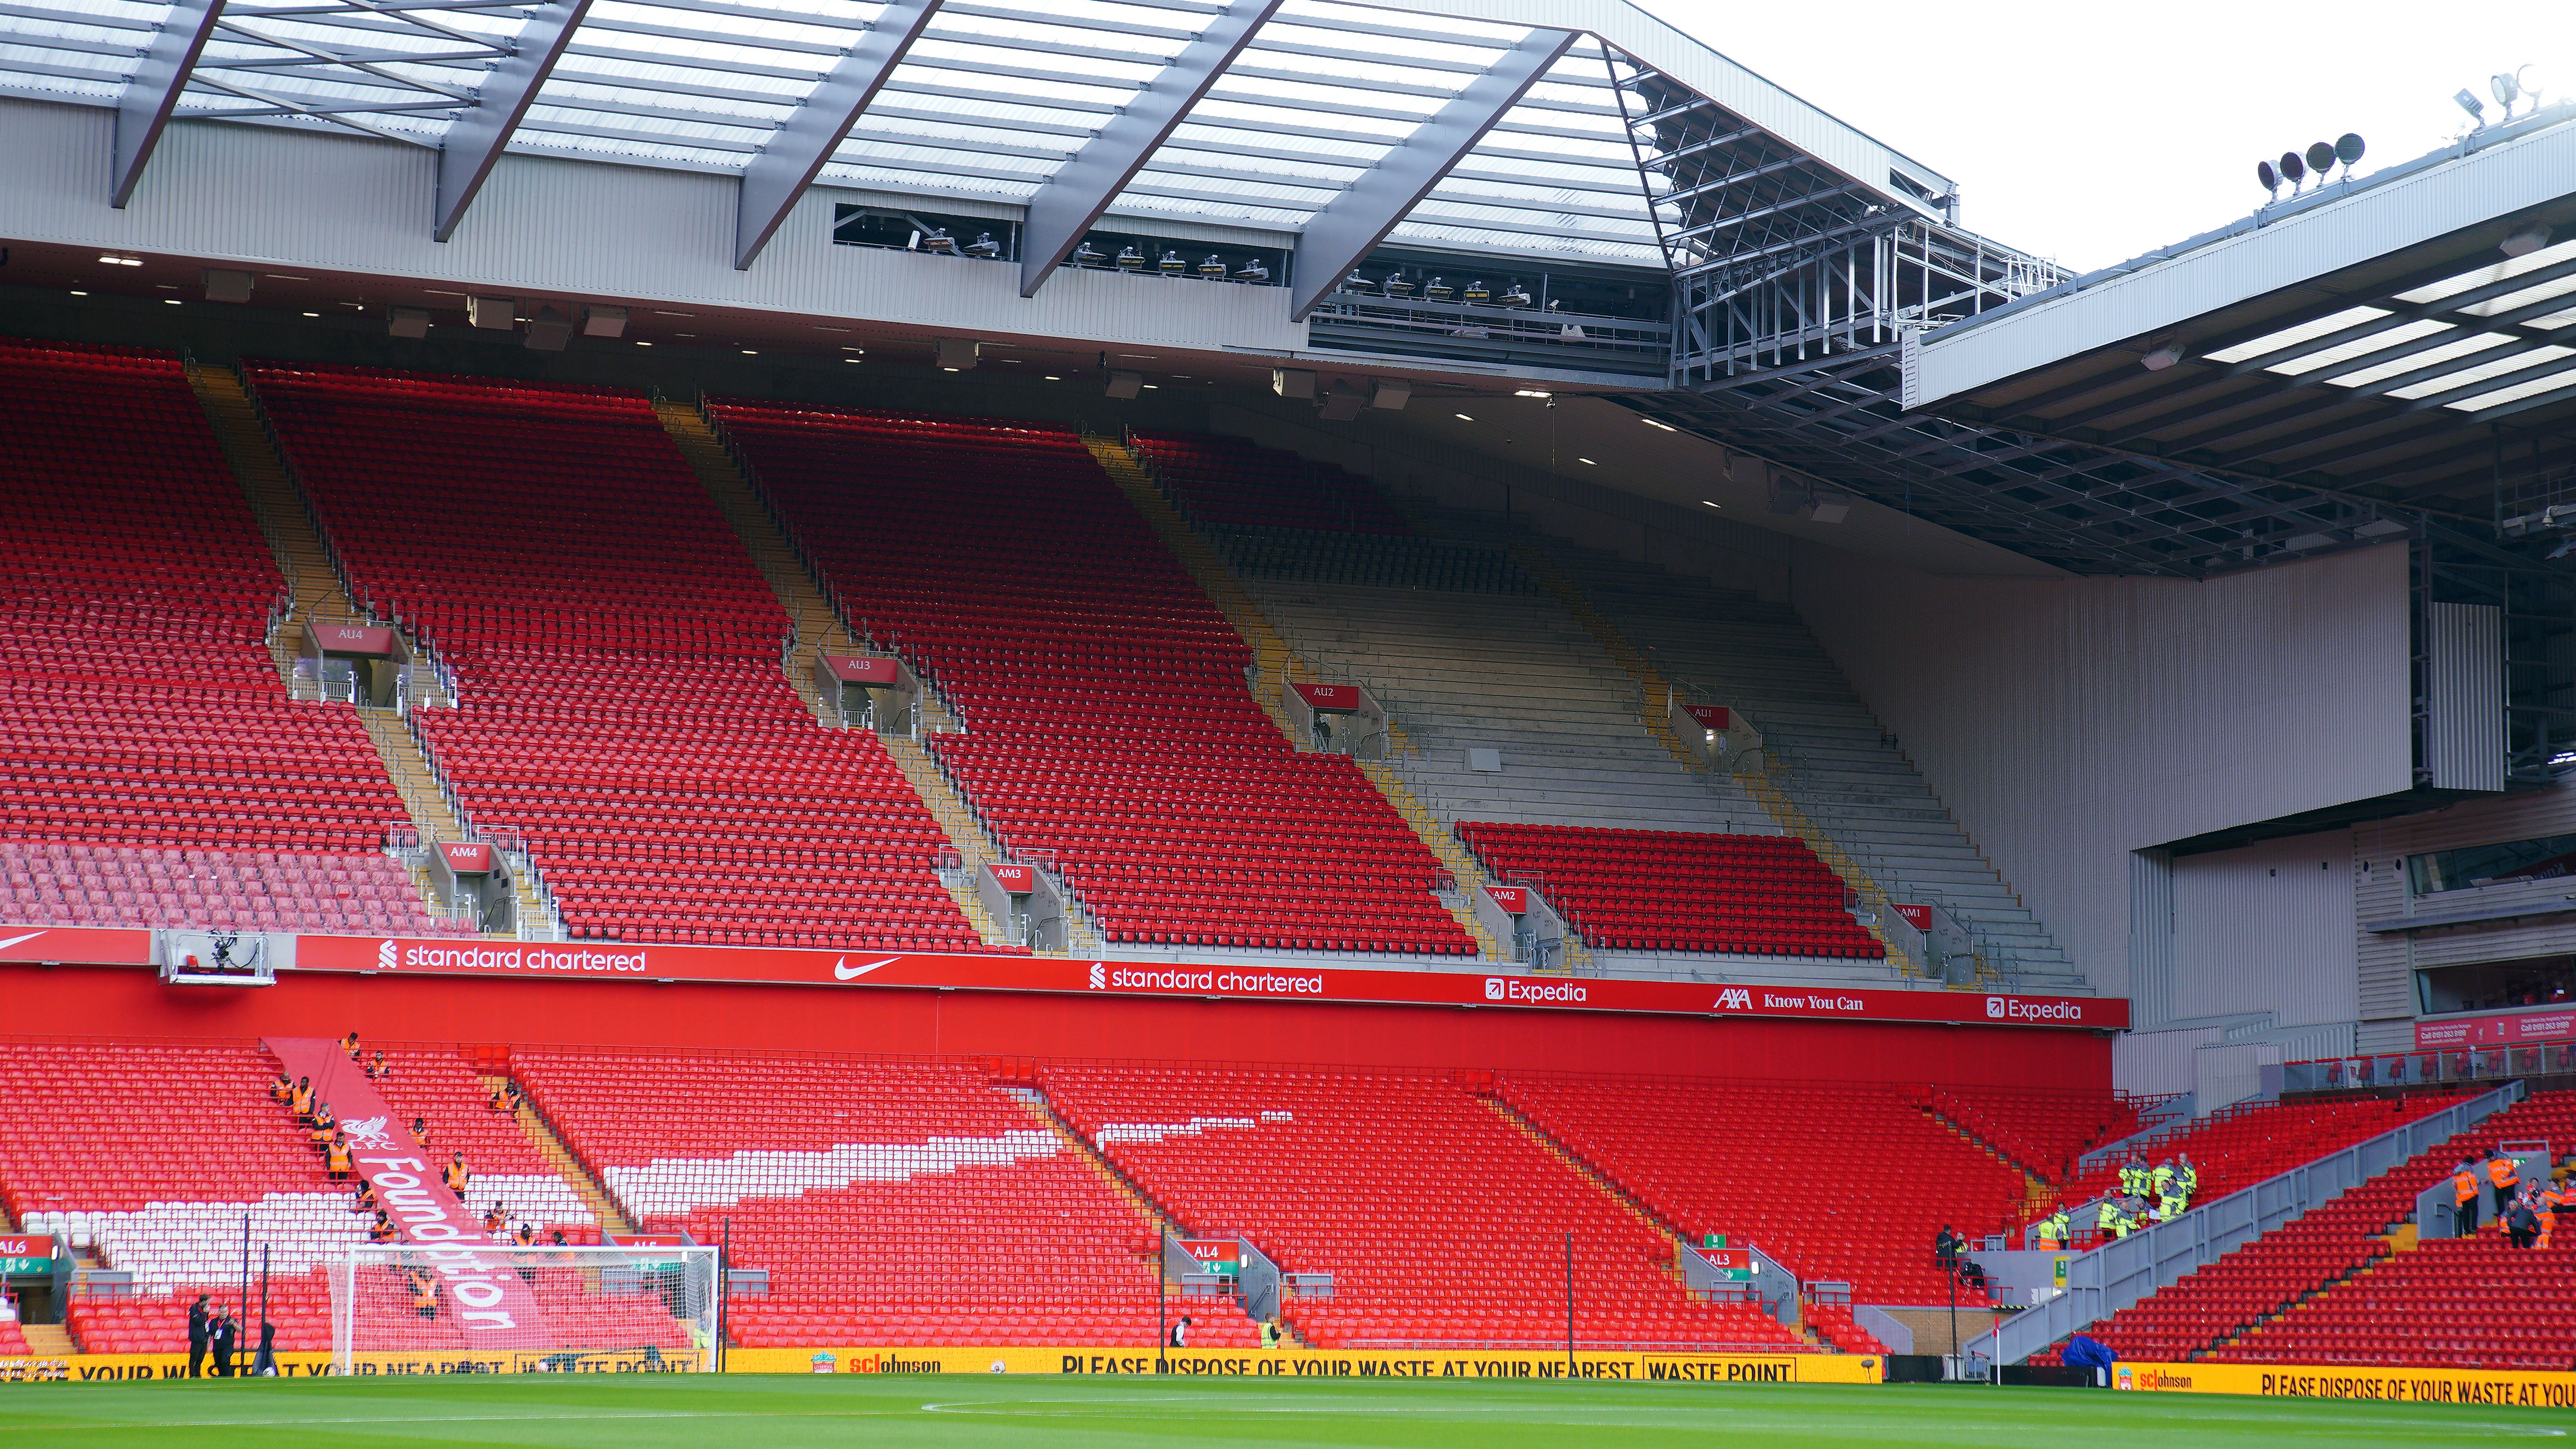 Increased capacity of 57,000 expected at Anfield for Liverpool v Man Utd clash